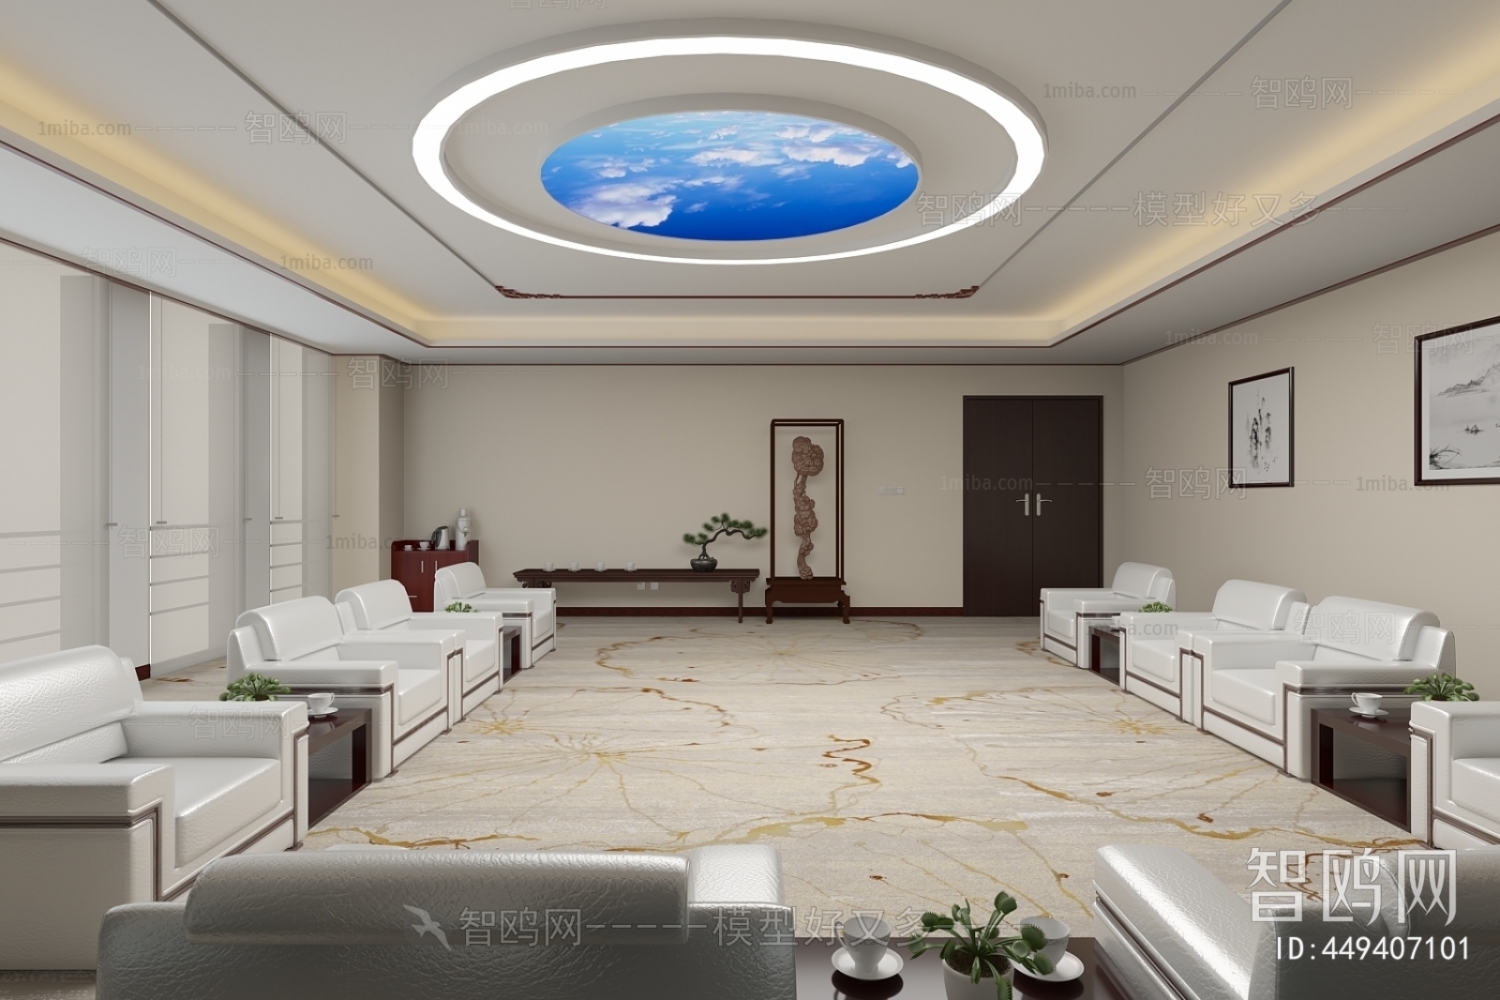 Chinese Style Reception Area